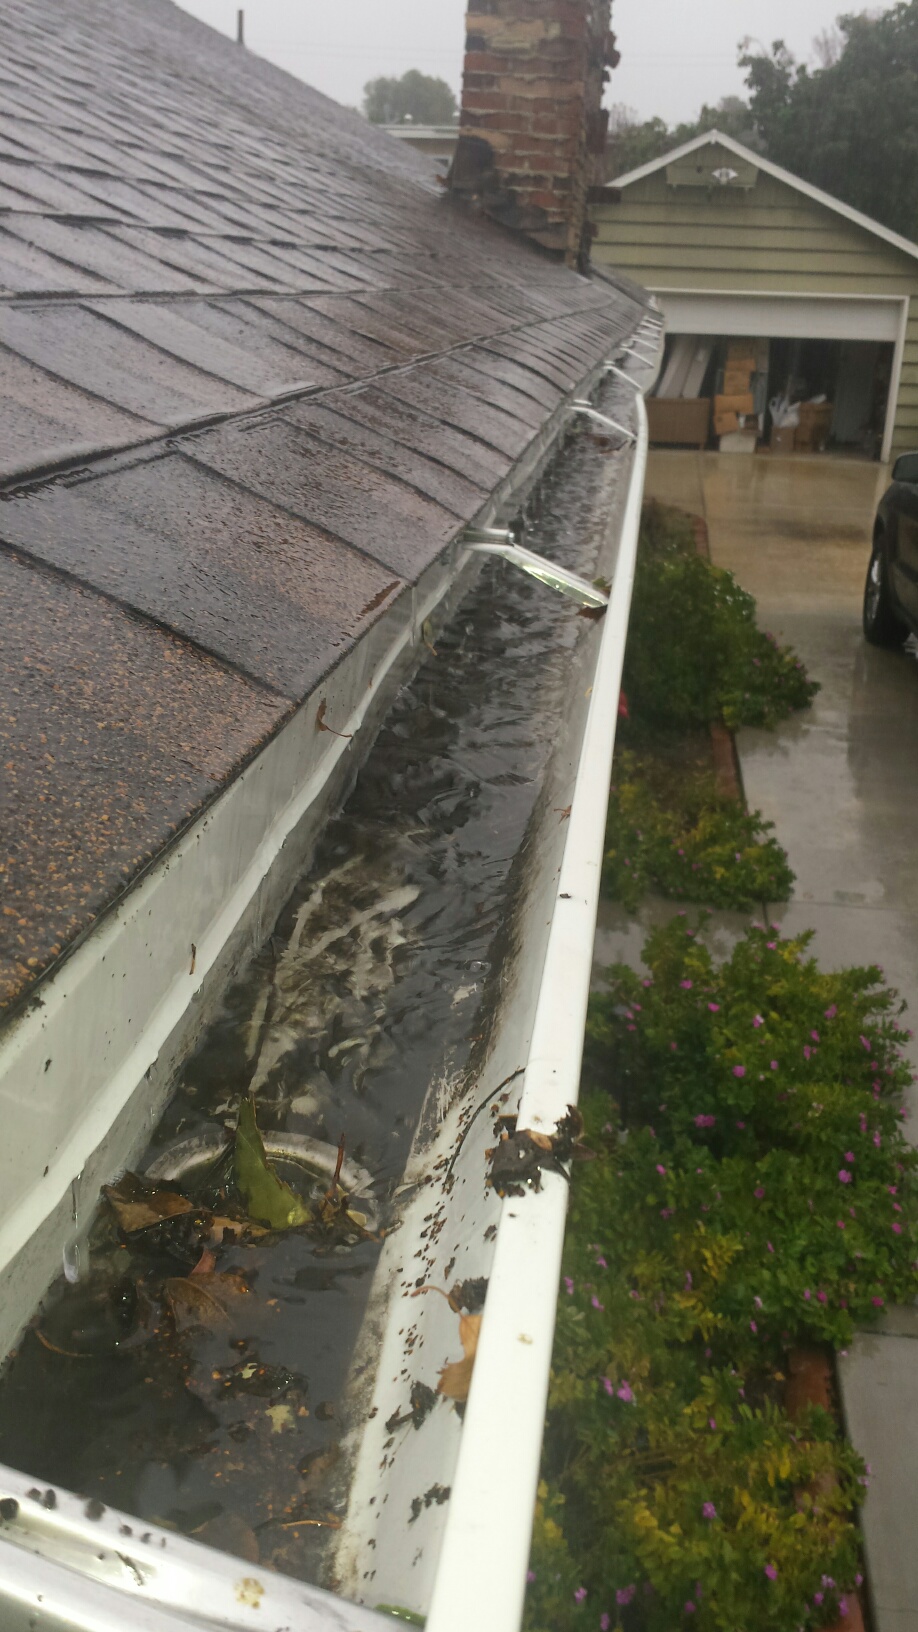 Prevent water damage by inspecting the rain gutters in your home